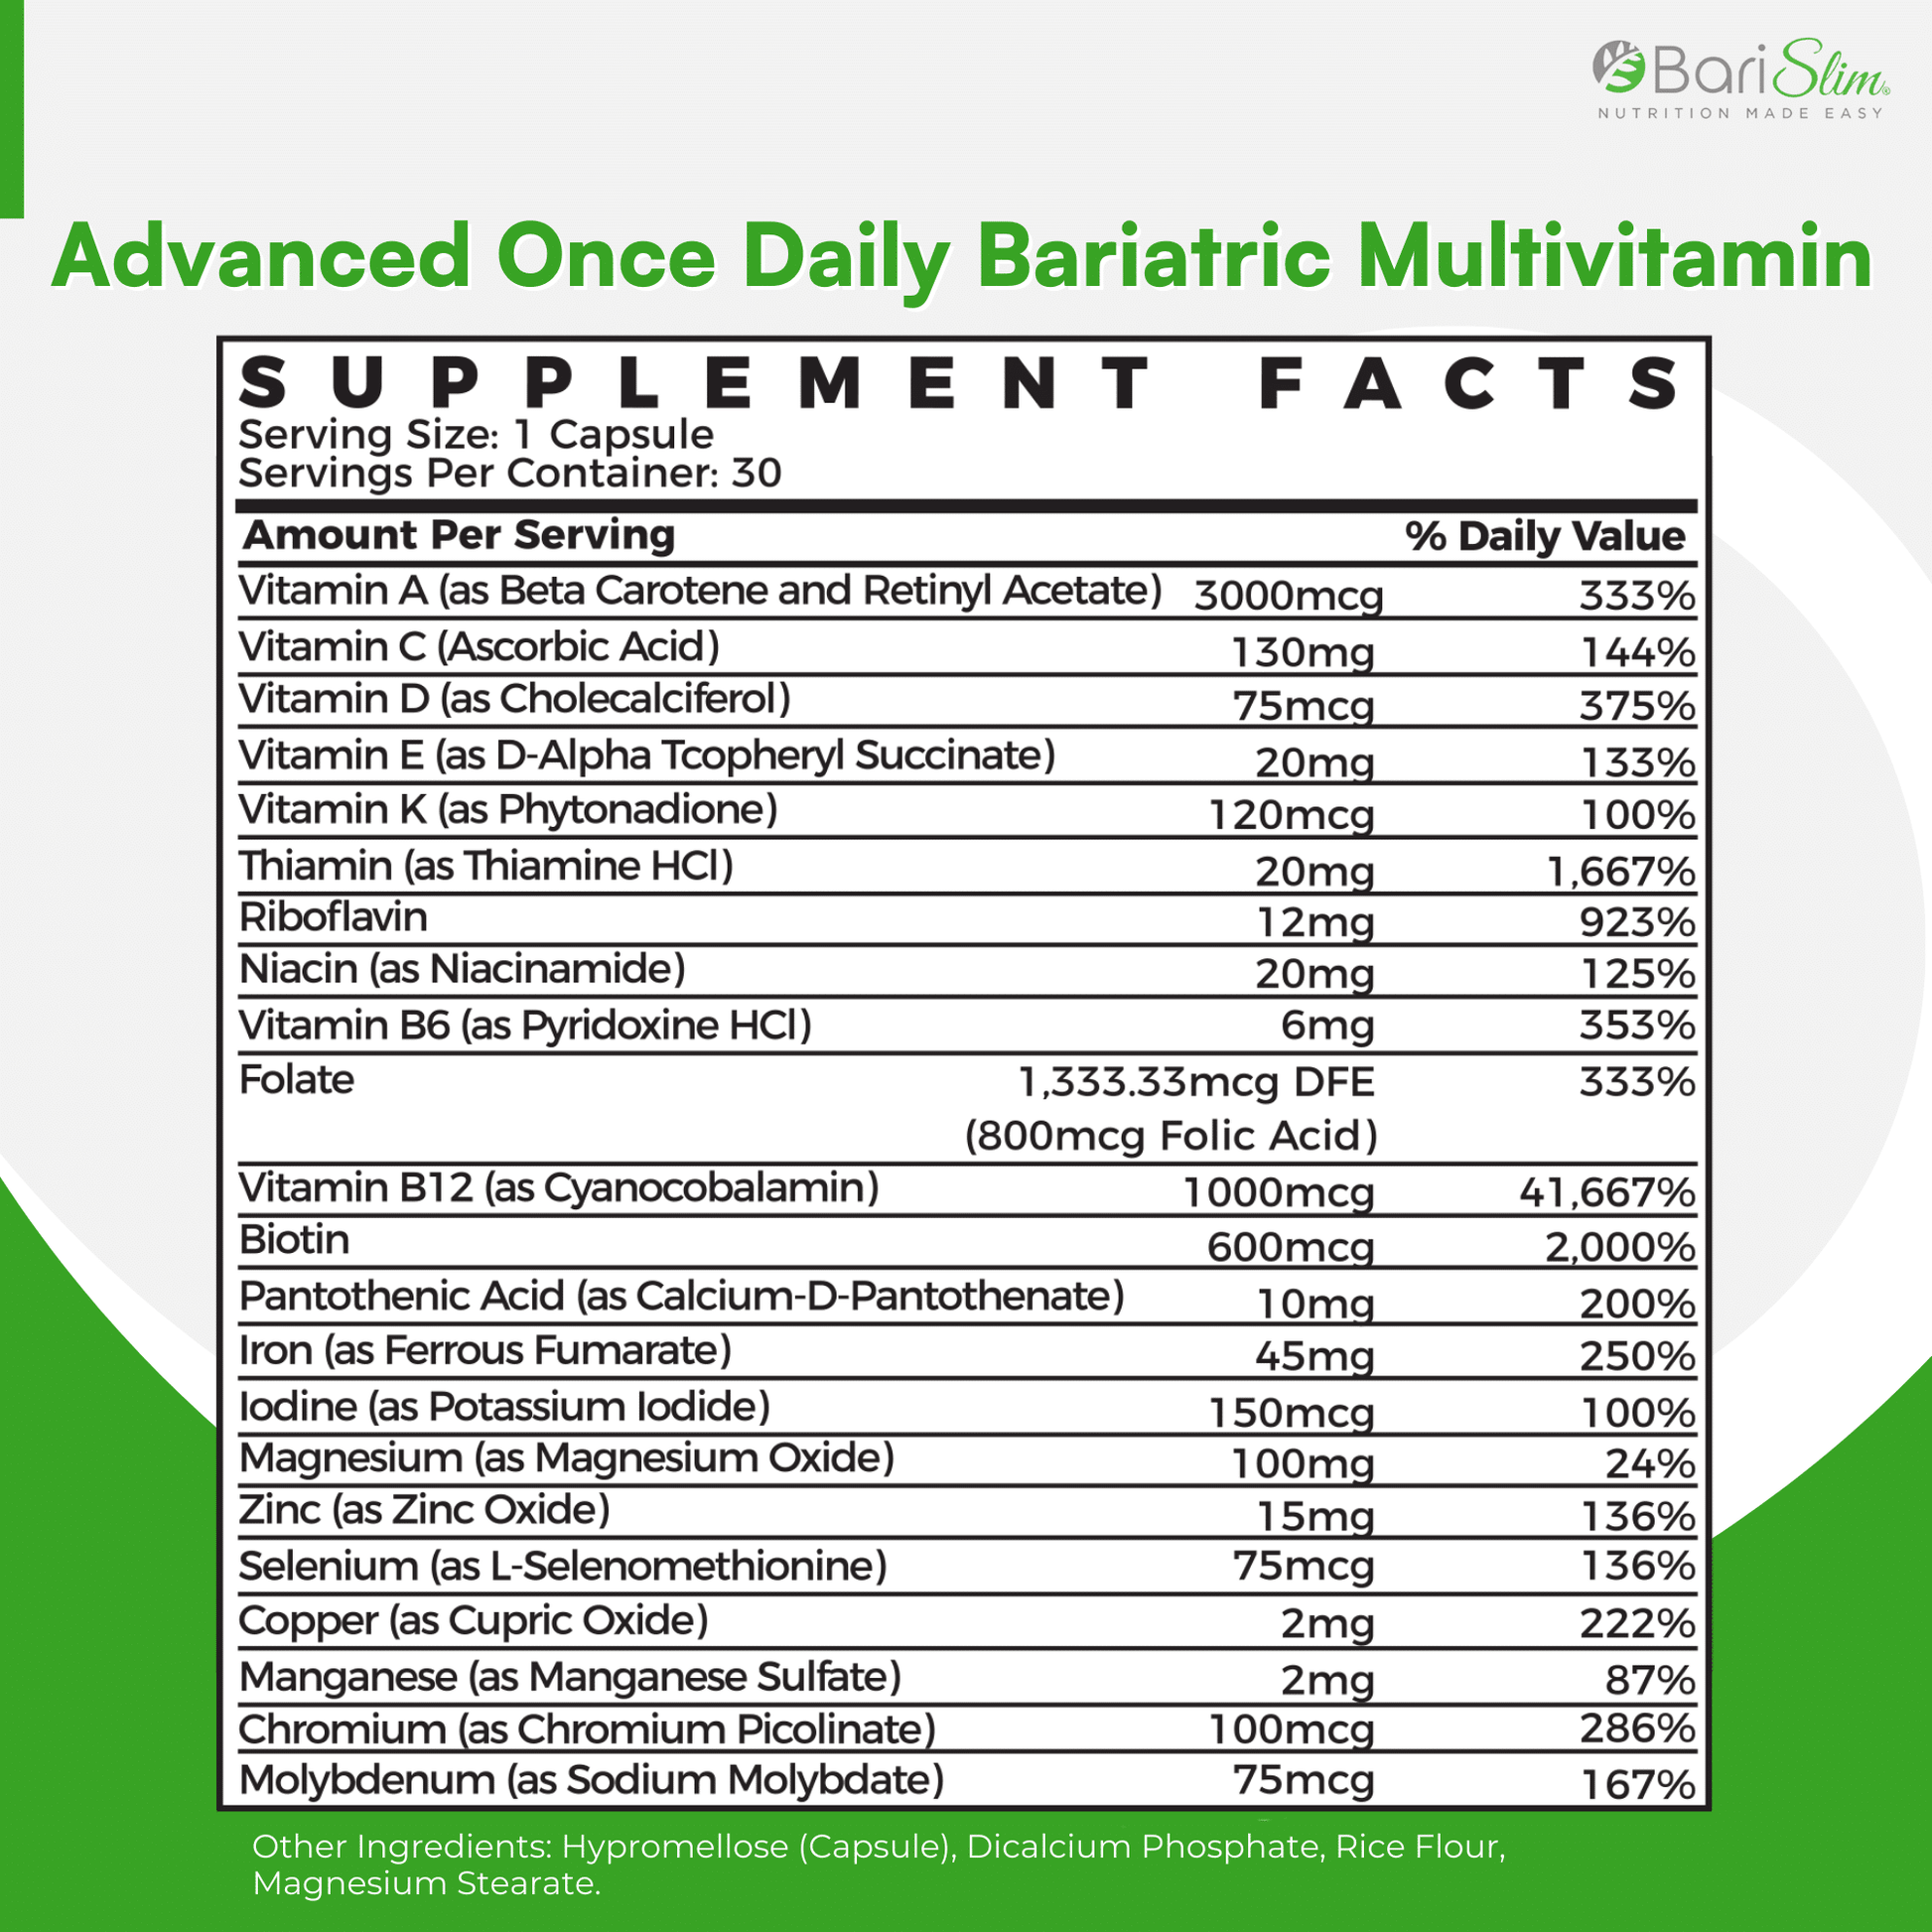 advanced daily multivitamin tablet with 45mg of iron